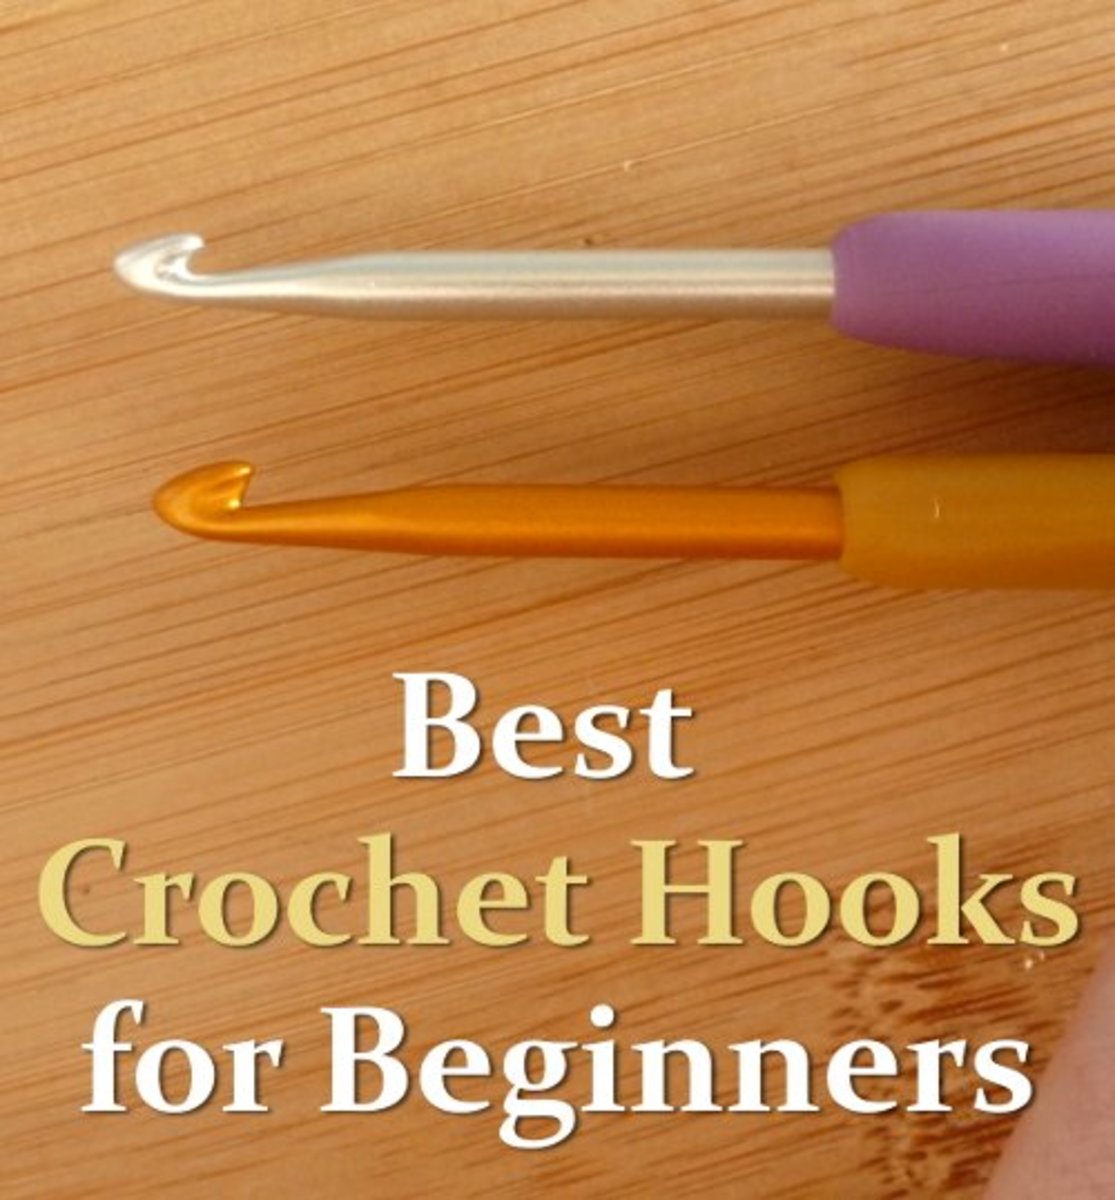 Best Crochet Hook and Size for Beginners